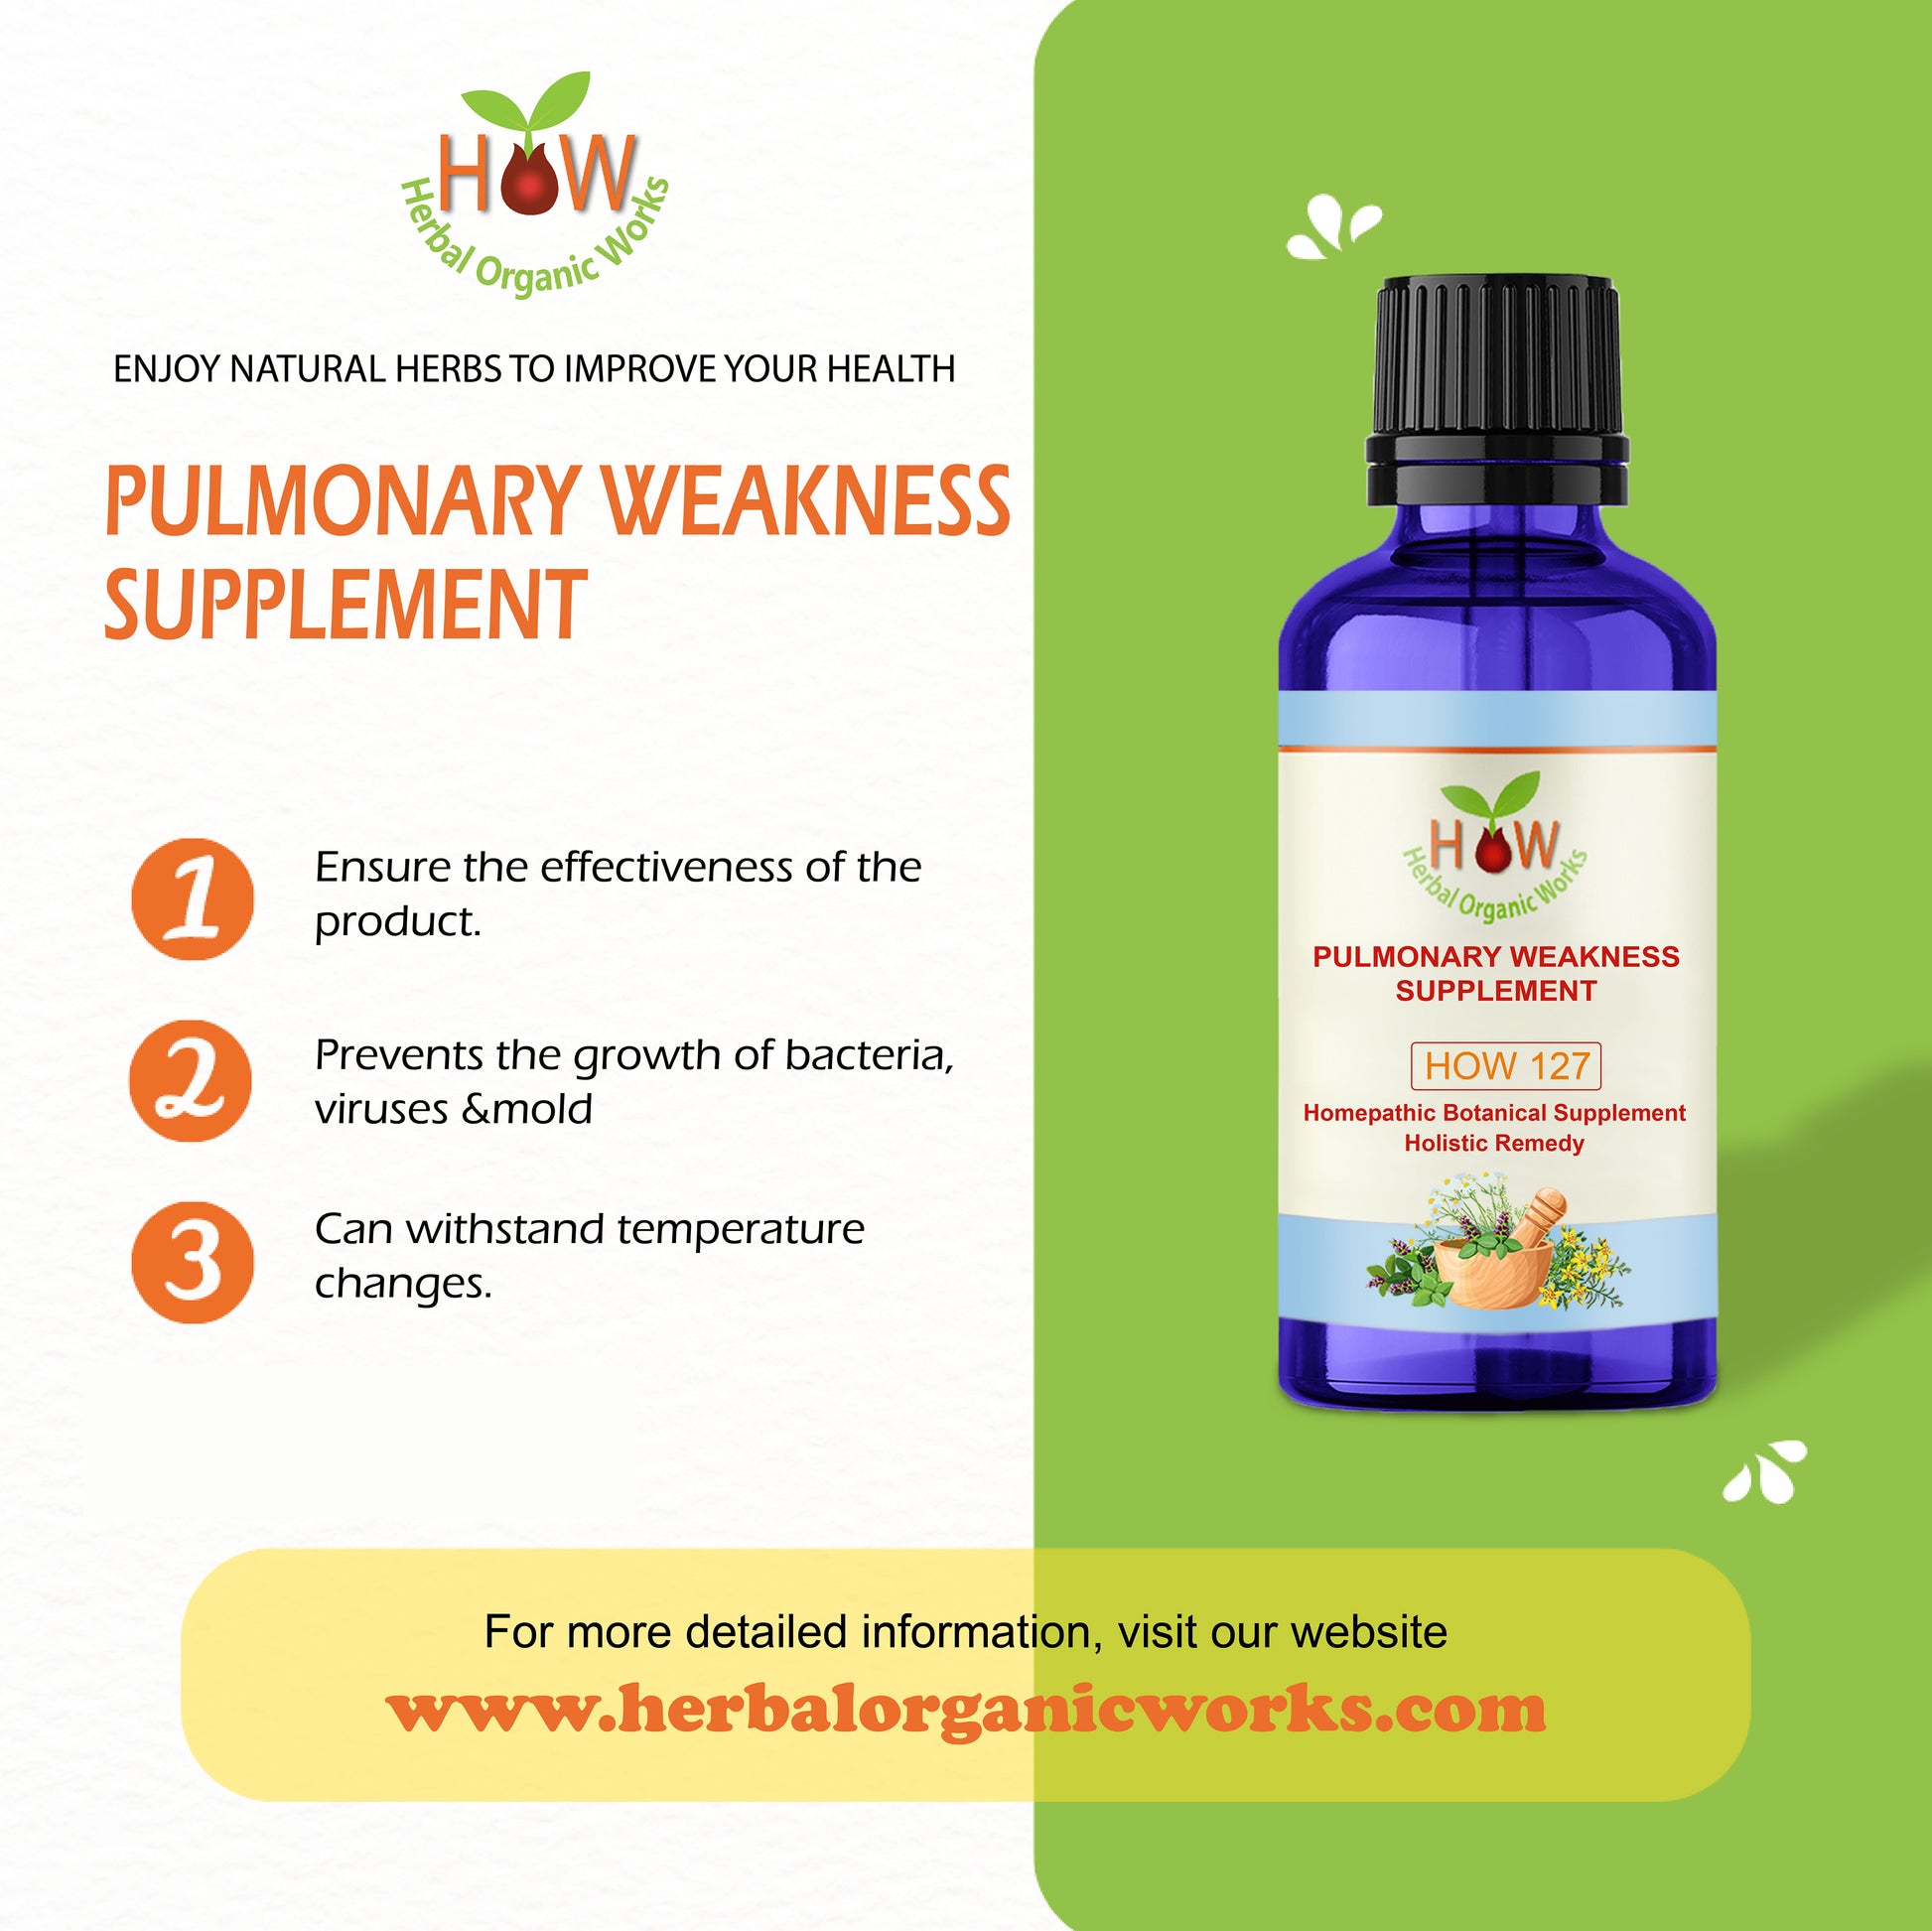 PULMONARY WEAKNESS NATURAL SUPPLEMENT (HOW127)